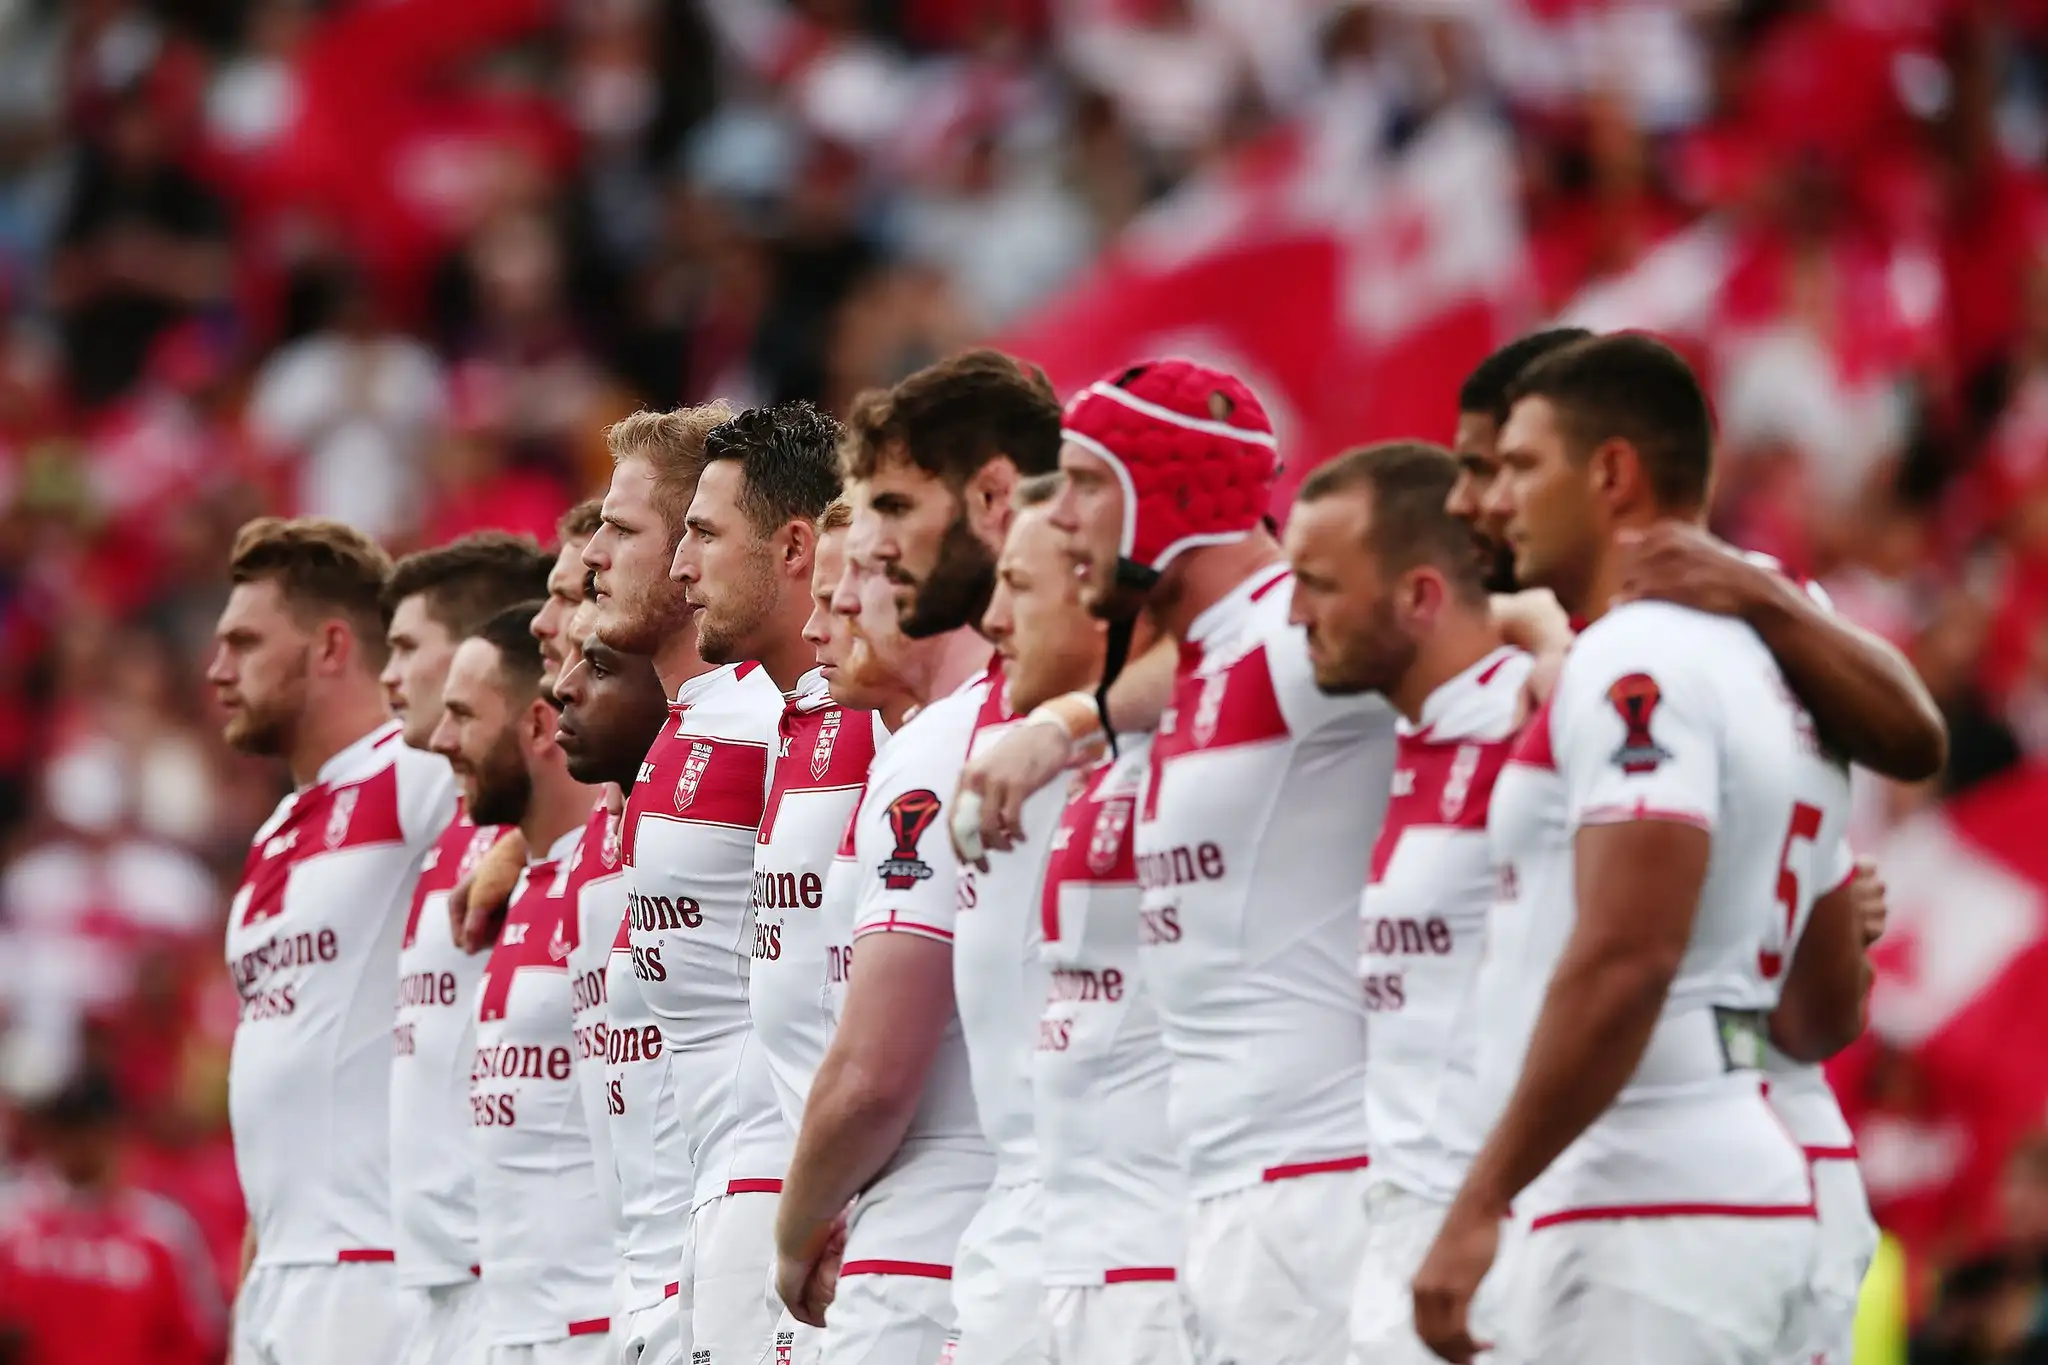 Parliament get behind England ahead of World Cup final